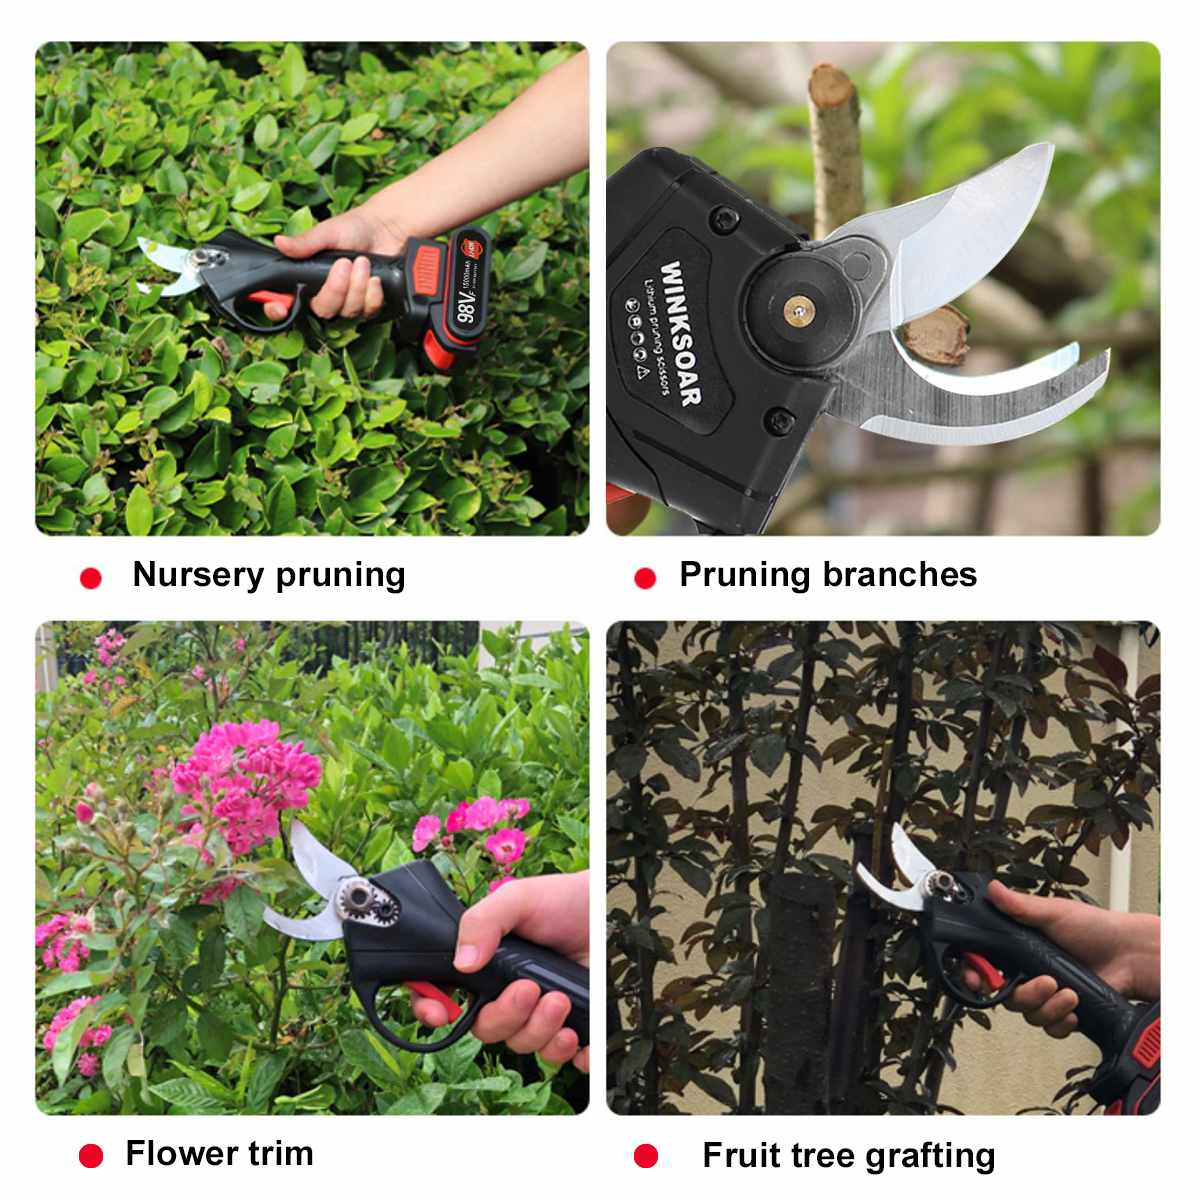 PowerTrim 98V Cordless Pruner - Your Ultimate Landscaping Companion Unleash Efficiency: The PowerTrim 98V Cordless Pruner is a game-changer for anyone looking to conquer landscaping tasks effortlessly. With a powerful 98V motor, it effortlessly trims and prunes branches, making it ideal for fruit orchards, vineyards, and more. Precision Cutting: Featuring a sharp, steel blade, this pruner ensures precise and clean cuts. It can tackle branches with a maximum diameter of 3cm (1.18 inches), providing you with the precision needed for effective pruning. Don't compromise on the quality and efficiency of your landscaping tools. The PowerTrim 98V Cordless Pruner is here to make your pruning tasks easier, faster, and more enjoyable.